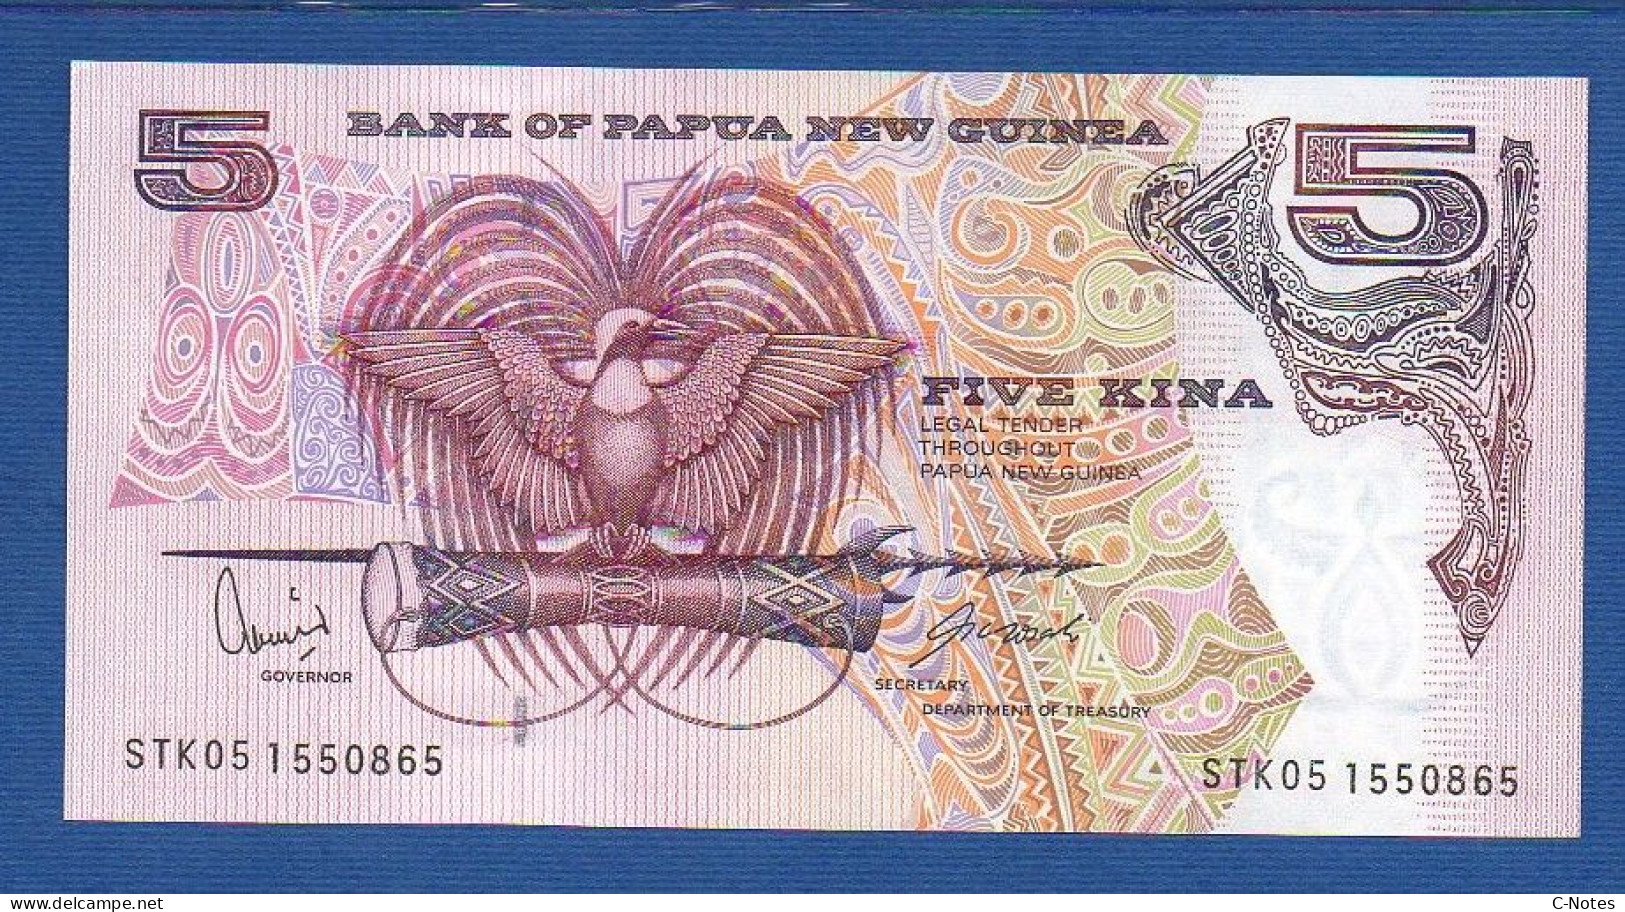 PAPUA NEW GUINEA - P.13f – 5 KINA ND (2005) UNC, S/n STK05 1550865 - Papouasie-Nouvelle-Guinée